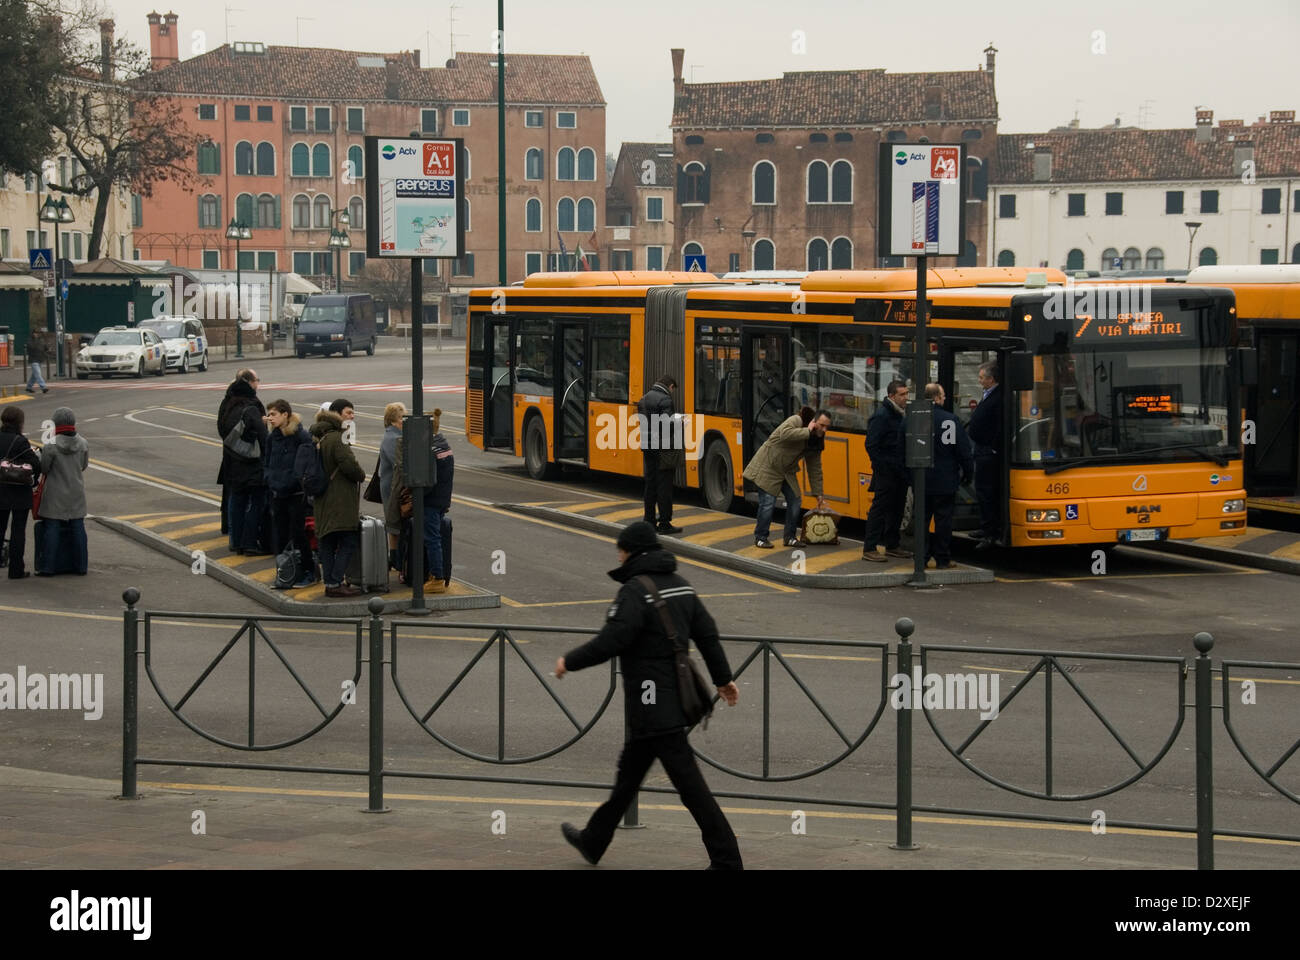 PIAZZALE ROMA BUS STATION in winter Stock Photo